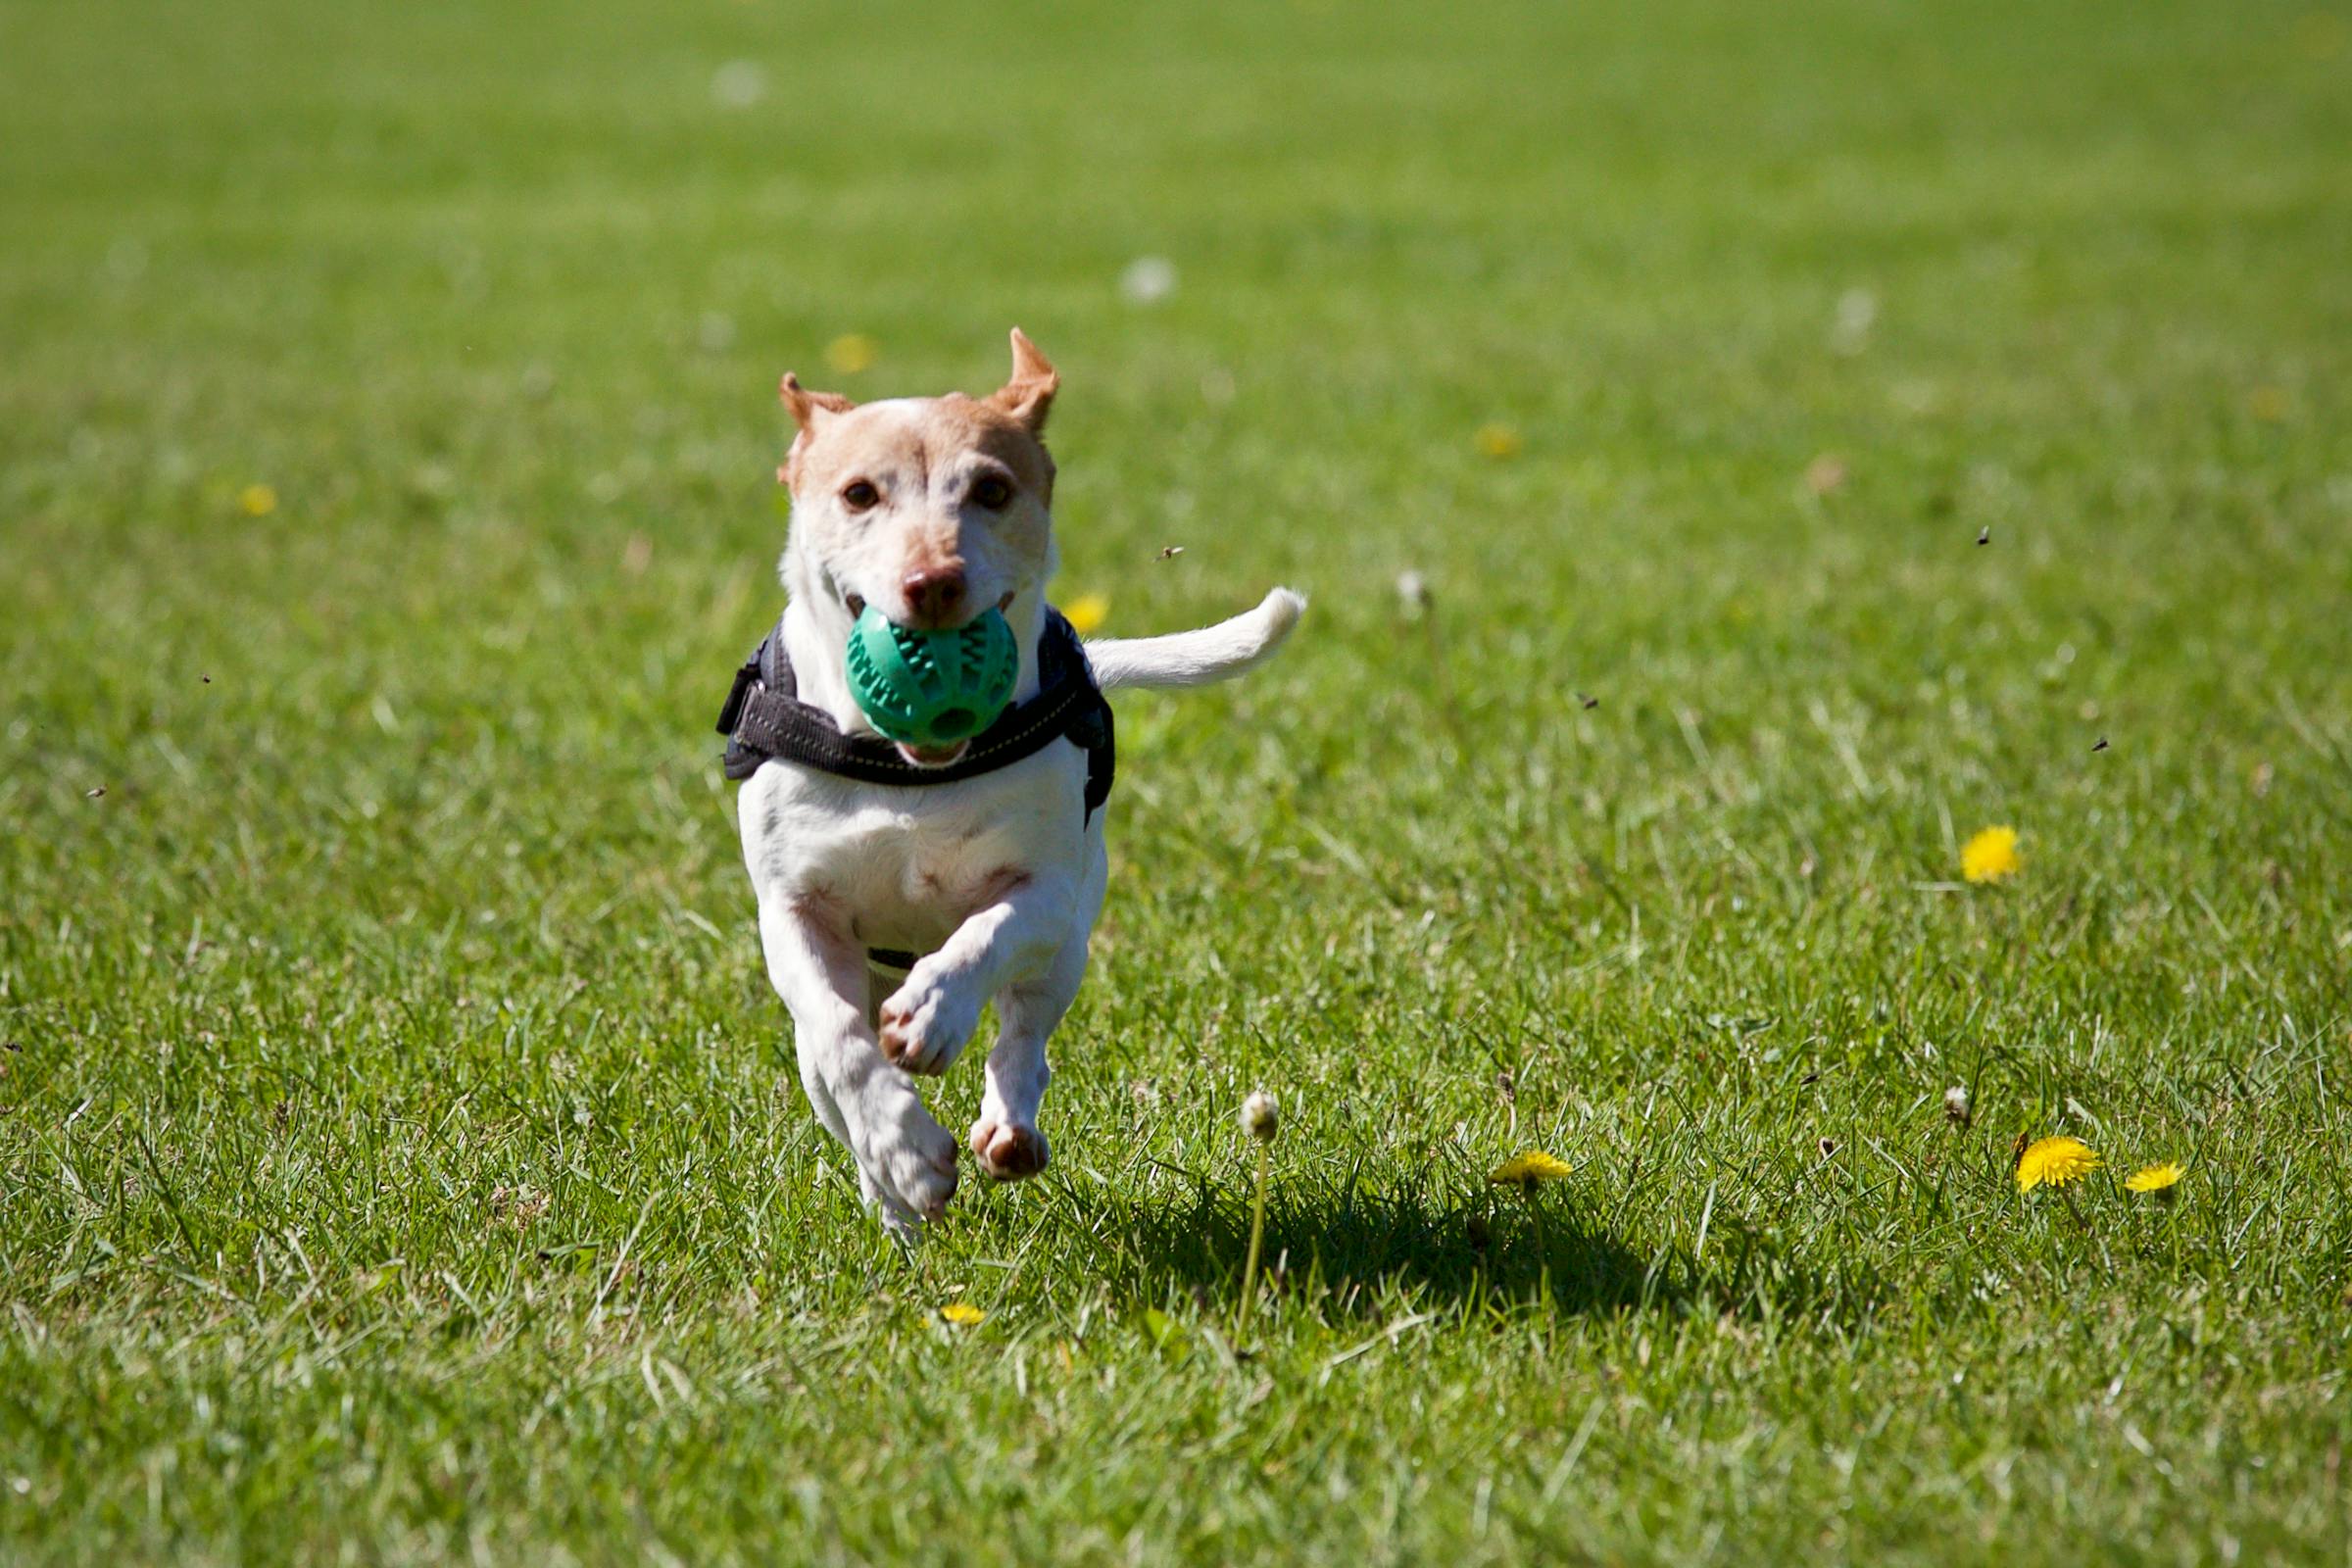 Dog running in grass with a ball in his mouth